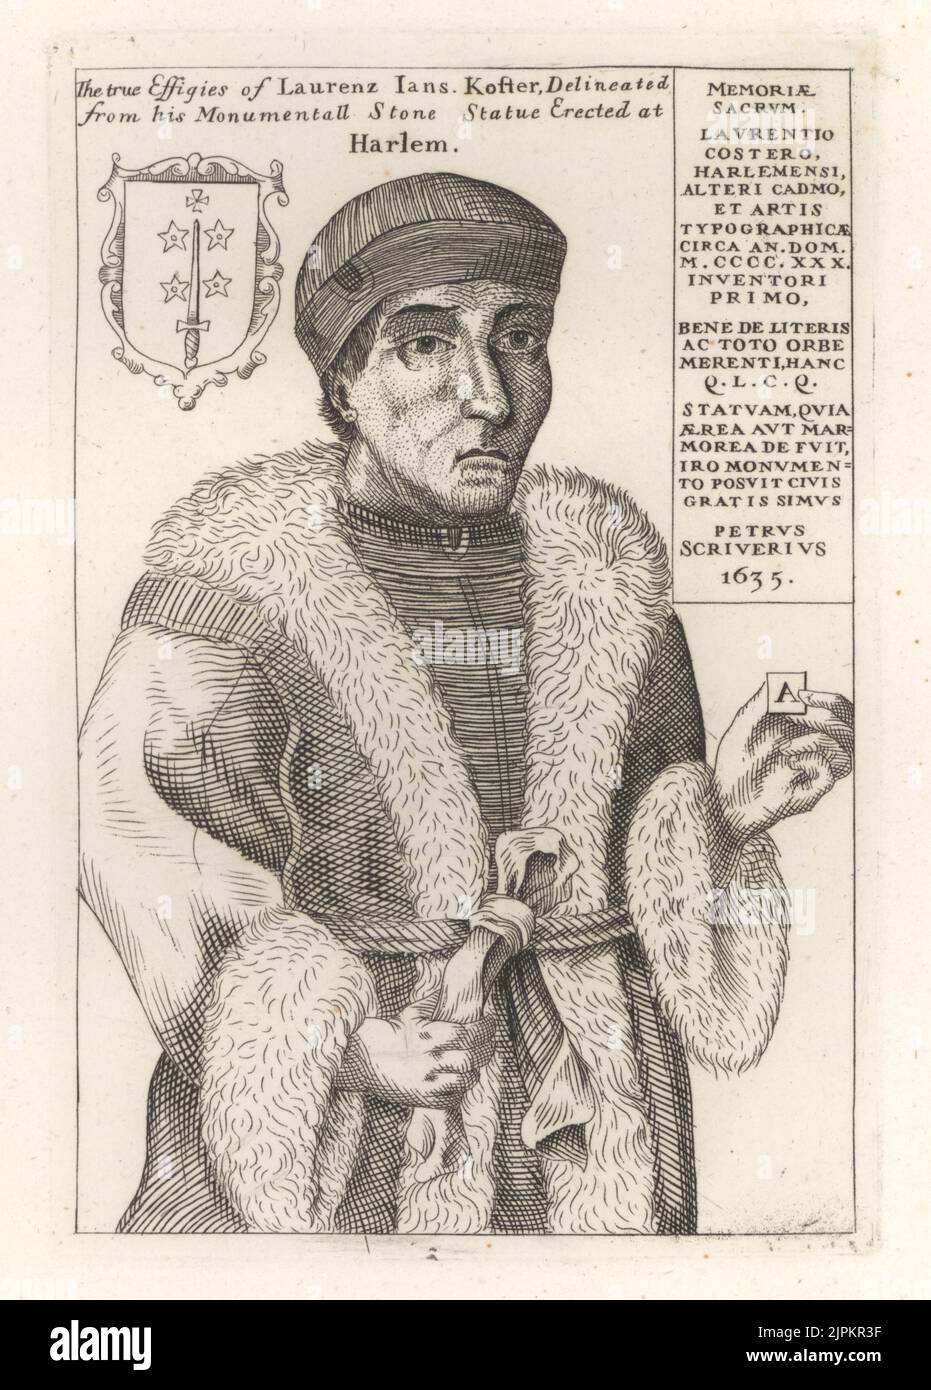 Laurens Janszoon Coster, Dutch inventor of printing, c.1370-1440. Printer and typographer who invented printing simultaneously with Johannes Gutenberg. In cap, fur-lined coat, holding a letter.  With coat of arms and biography by Petrus Scriverius. Laurenz Jans Kofter, Laurentio Costero, from his grave effigy in Harlem. Copperplate engraving from Samuel Woodburn’s Gallery of Rare Portraits Consisting of Original Plates, George Jones, 102 St Martin’s Lane, London, 1816. Stock Photo